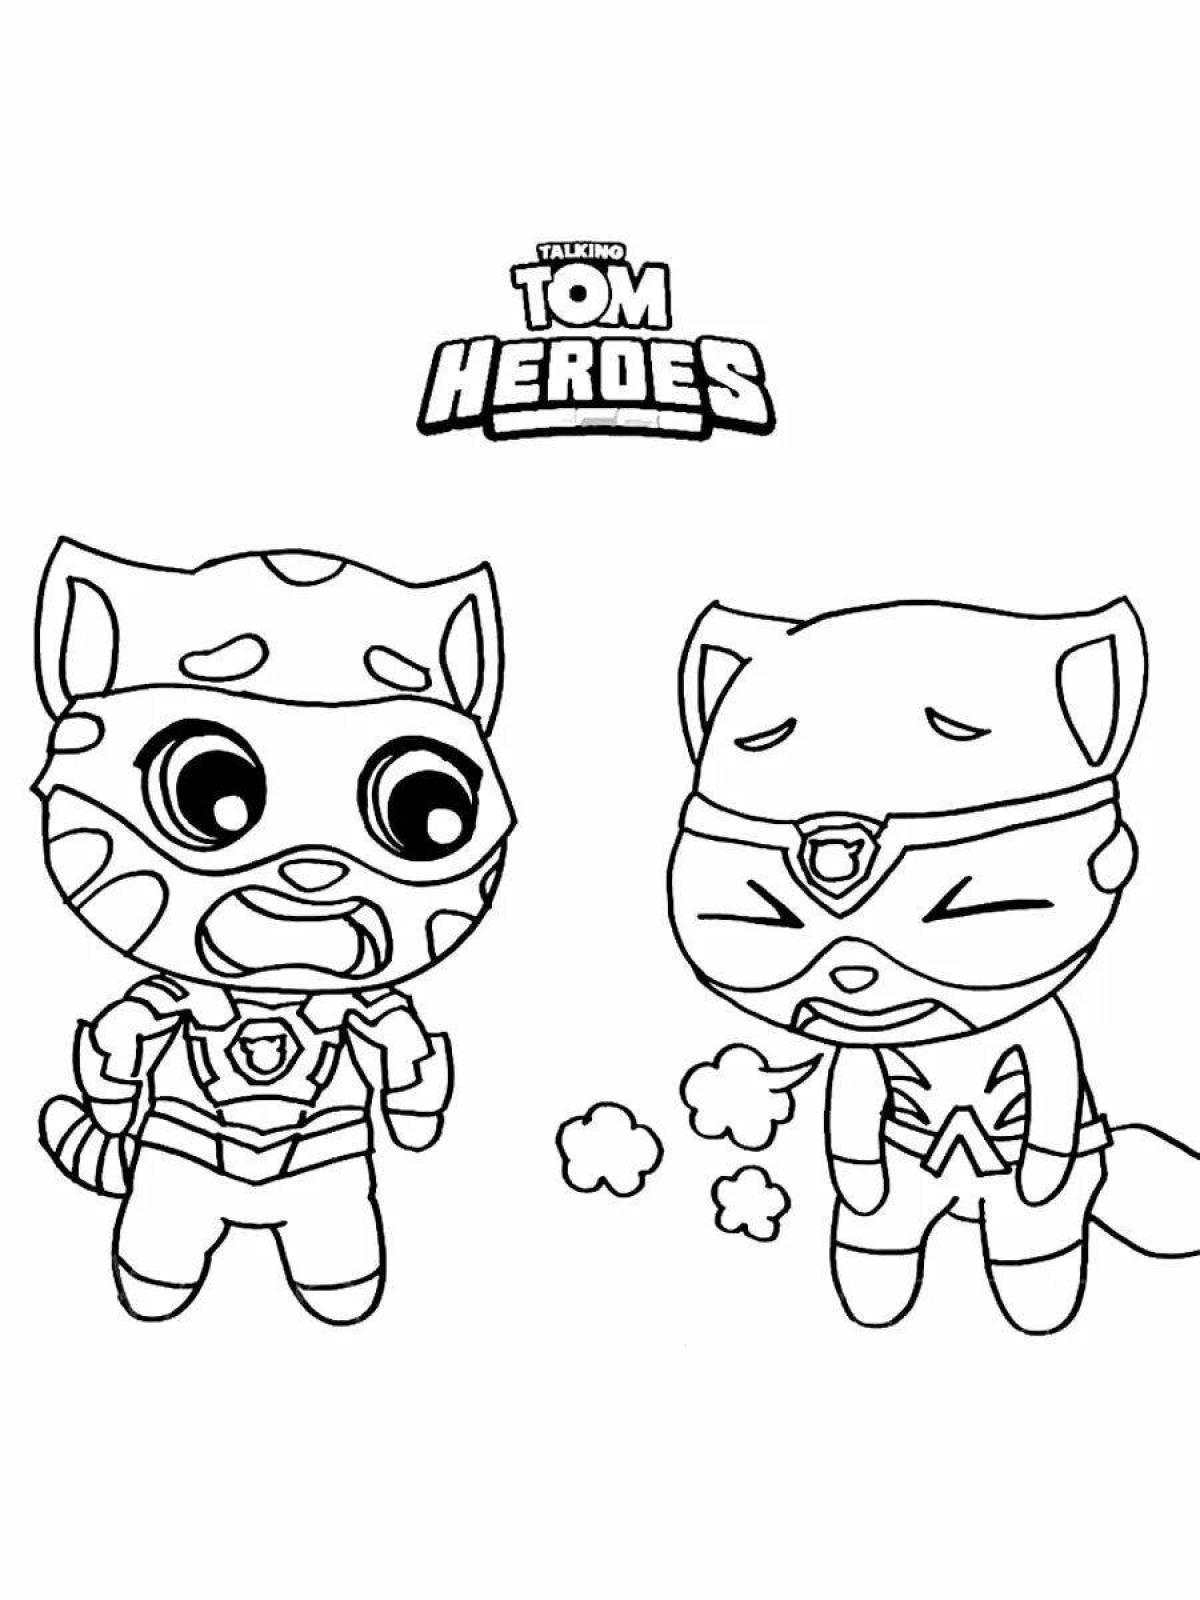 Amazing tom and ben coloring pages